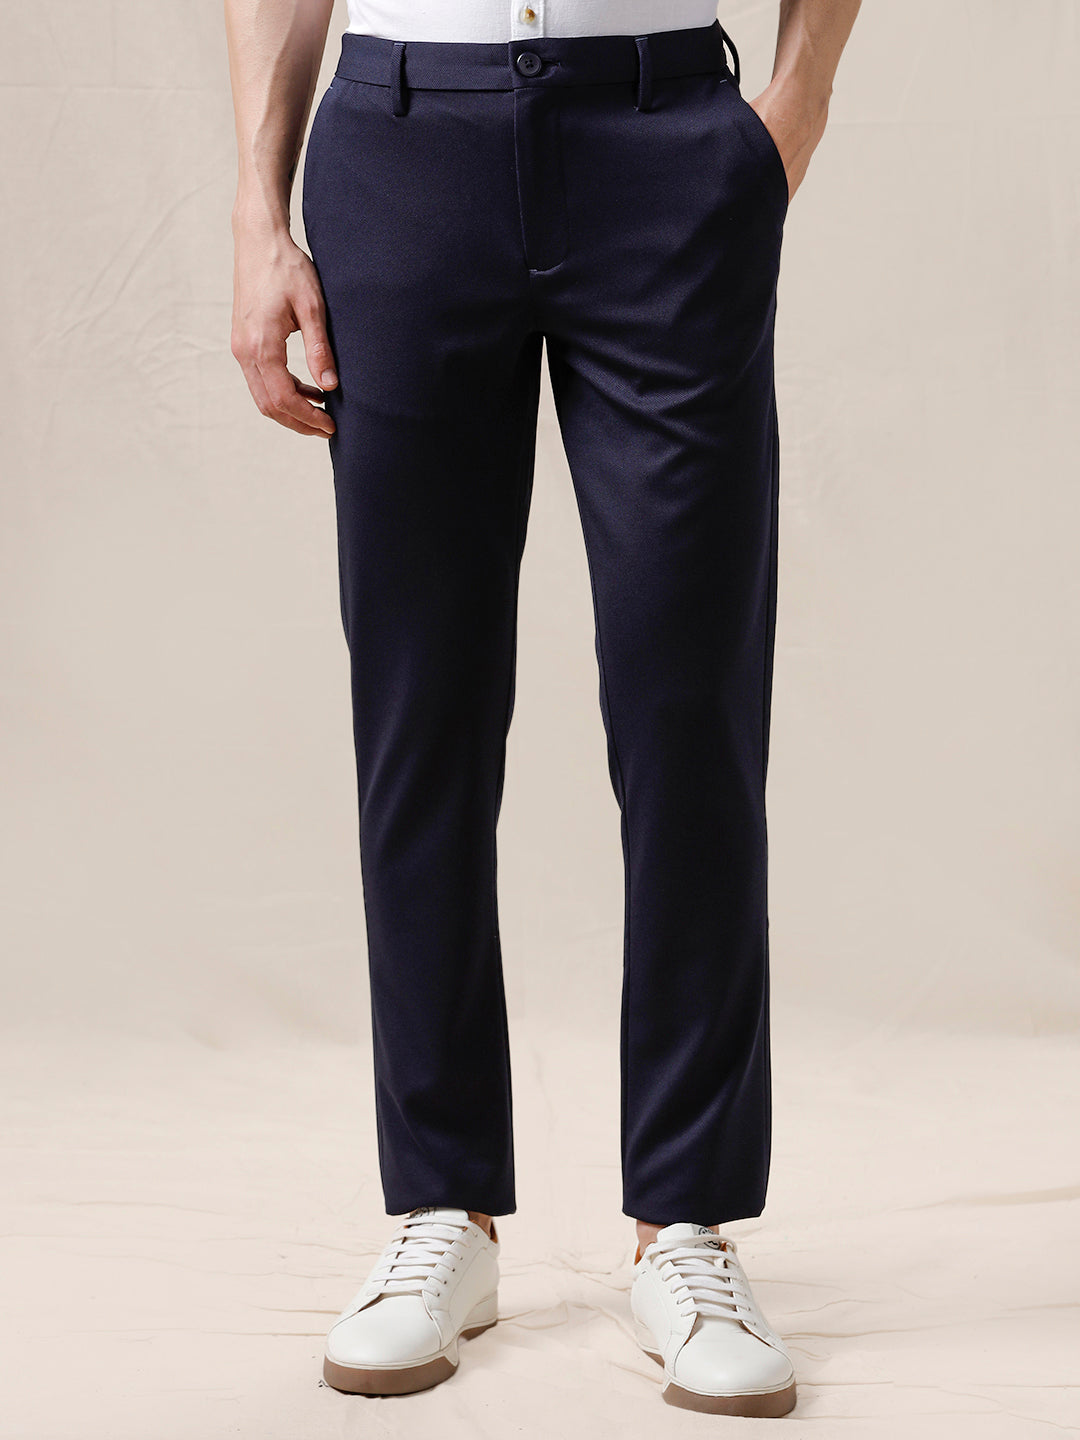 Classic Formal Blue Trousers